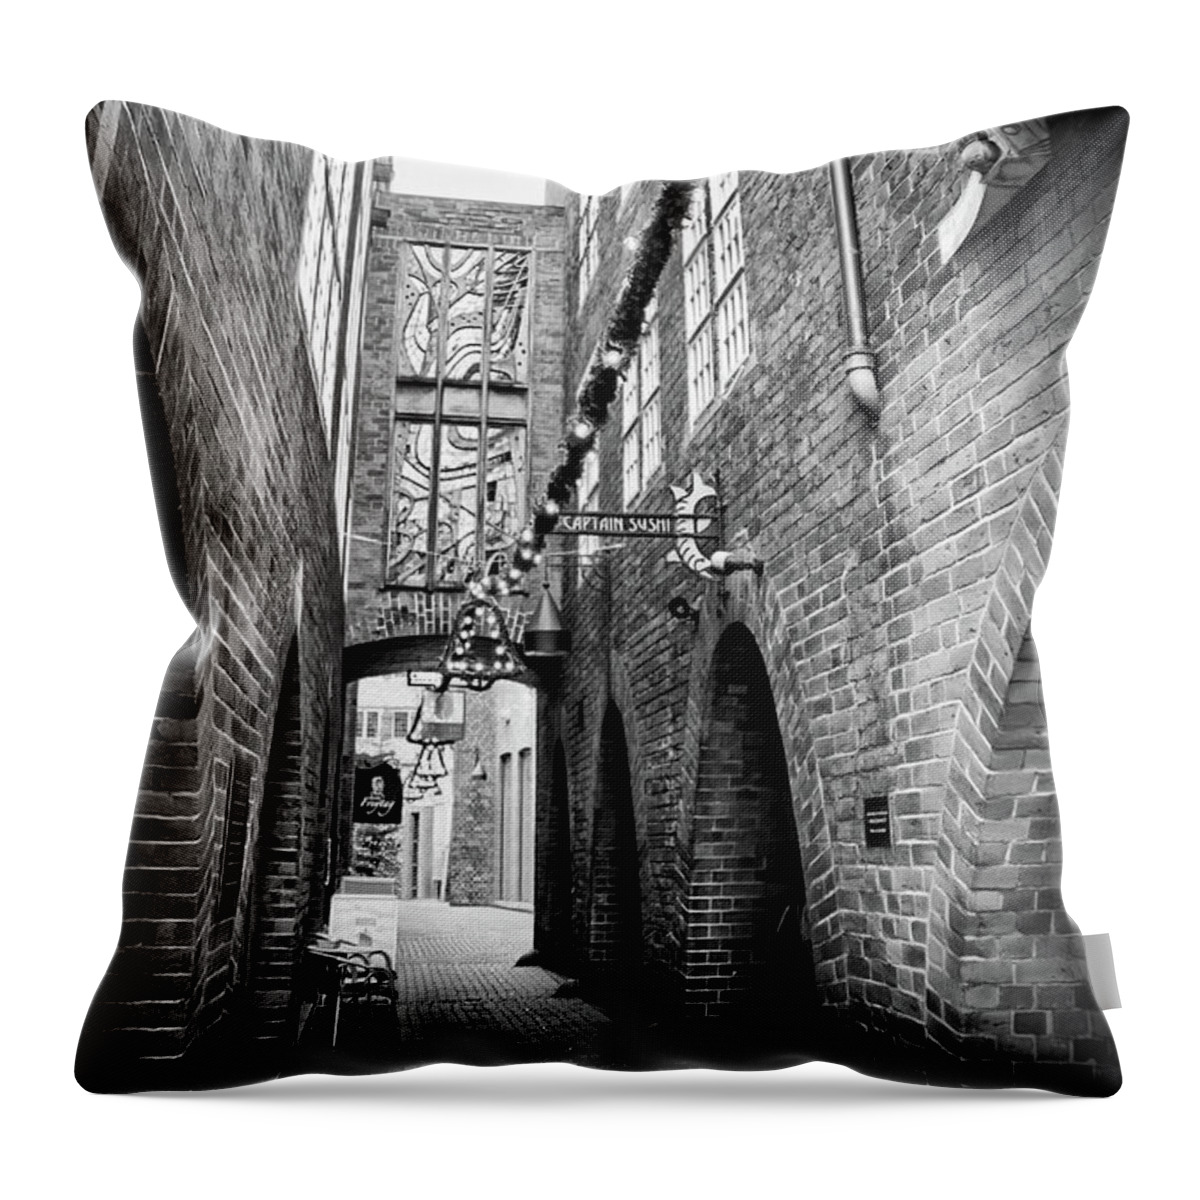 Bremen Throw Pillow featuring the photograph Bottcherstrasse Bremen Germany Black and White by Carol Japp